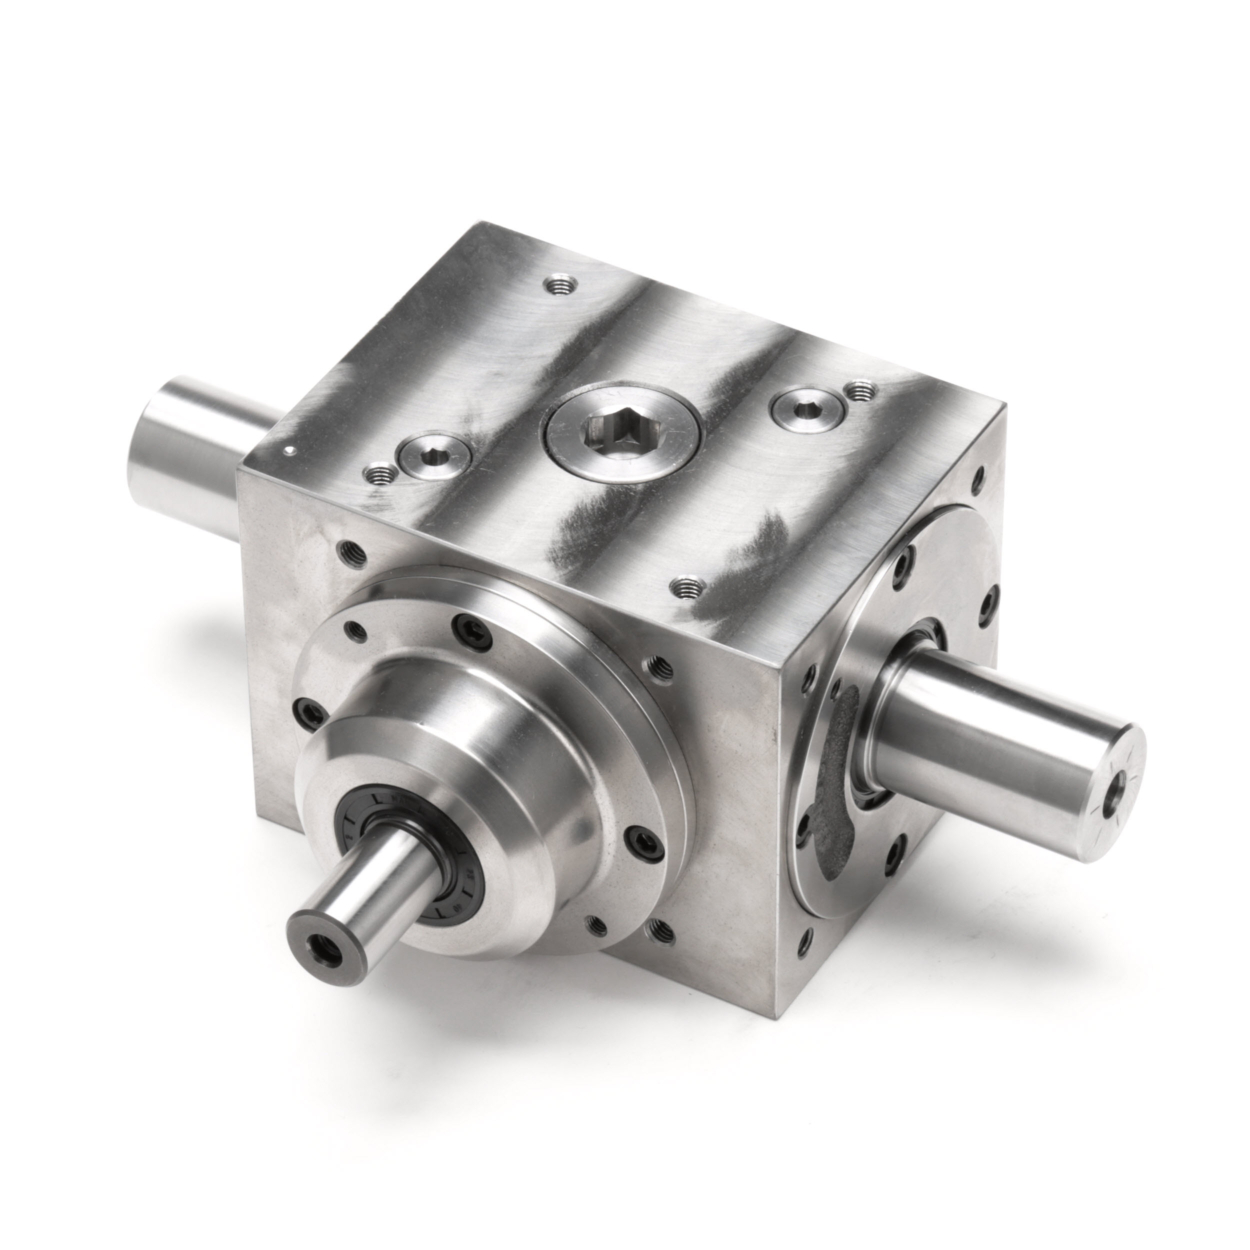 T series screw spiral bevel gearbox steering gear box spiral bevel units  gear helical comer 90 degree right angle gearbox China manufacturer and  supplier - EVER-POWER GROUP